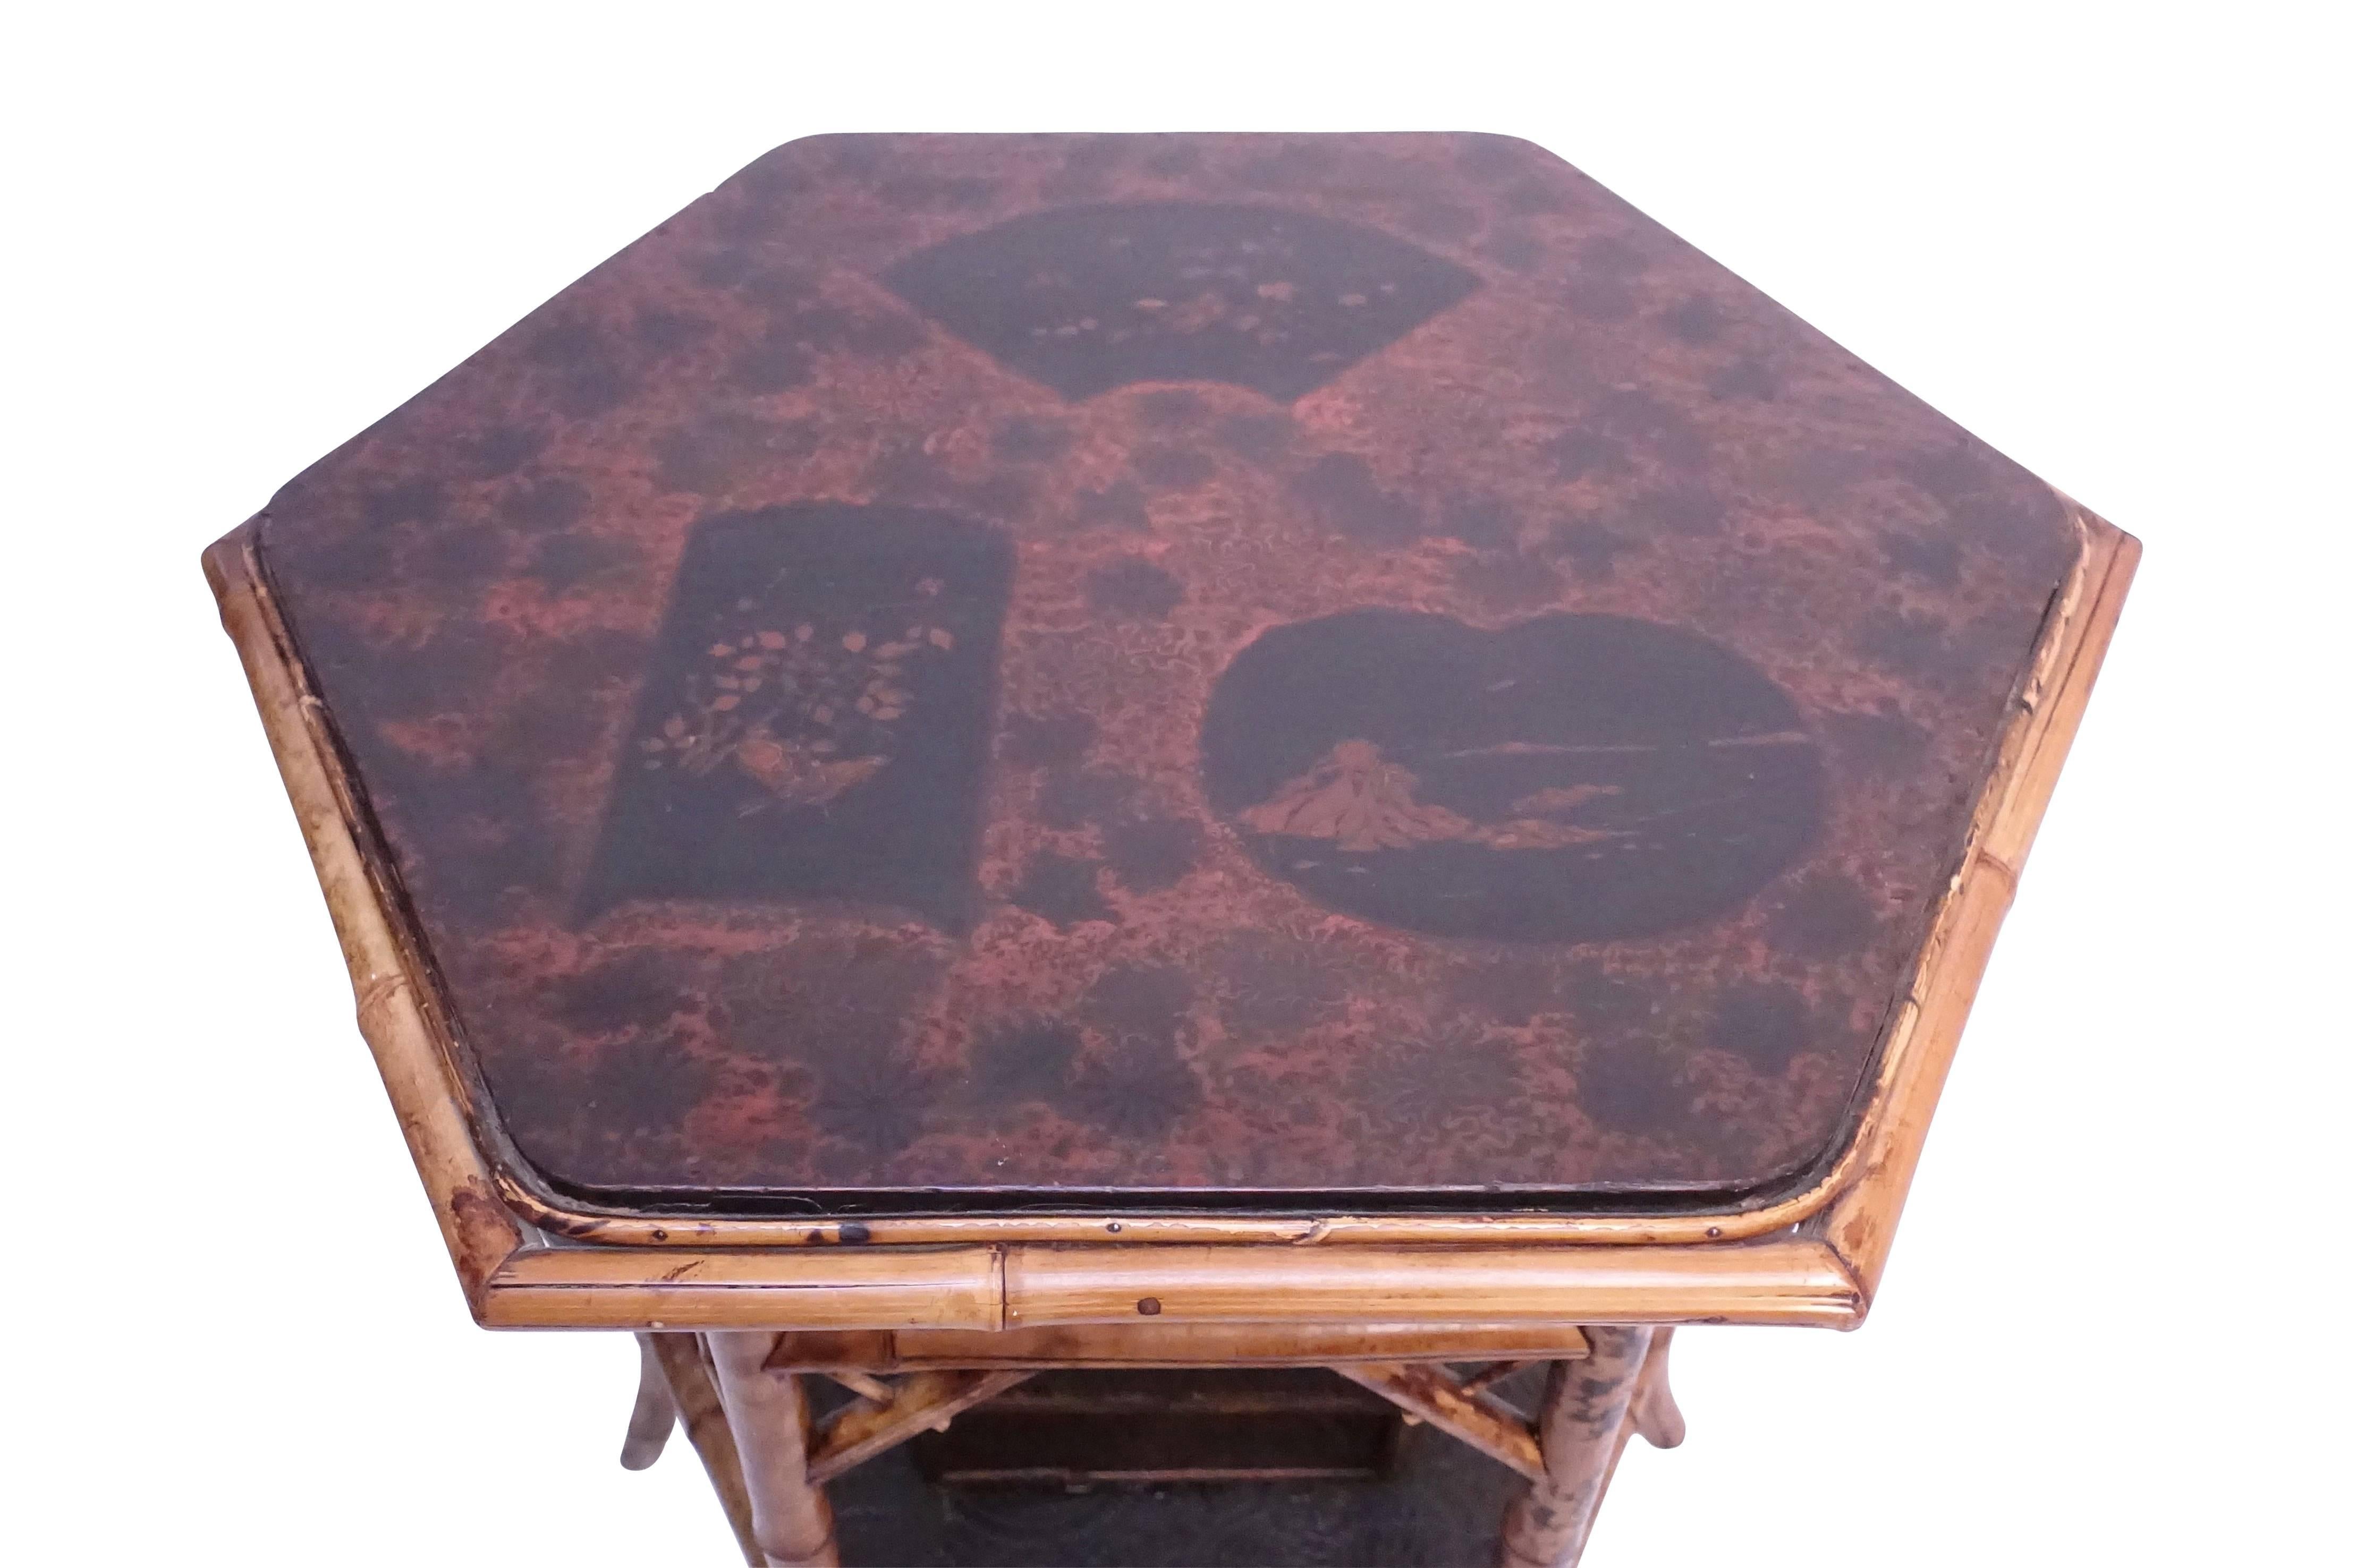 Aesthetic Movement Octagonal Bamboo and Lacquer Top Table, American, circa 1880